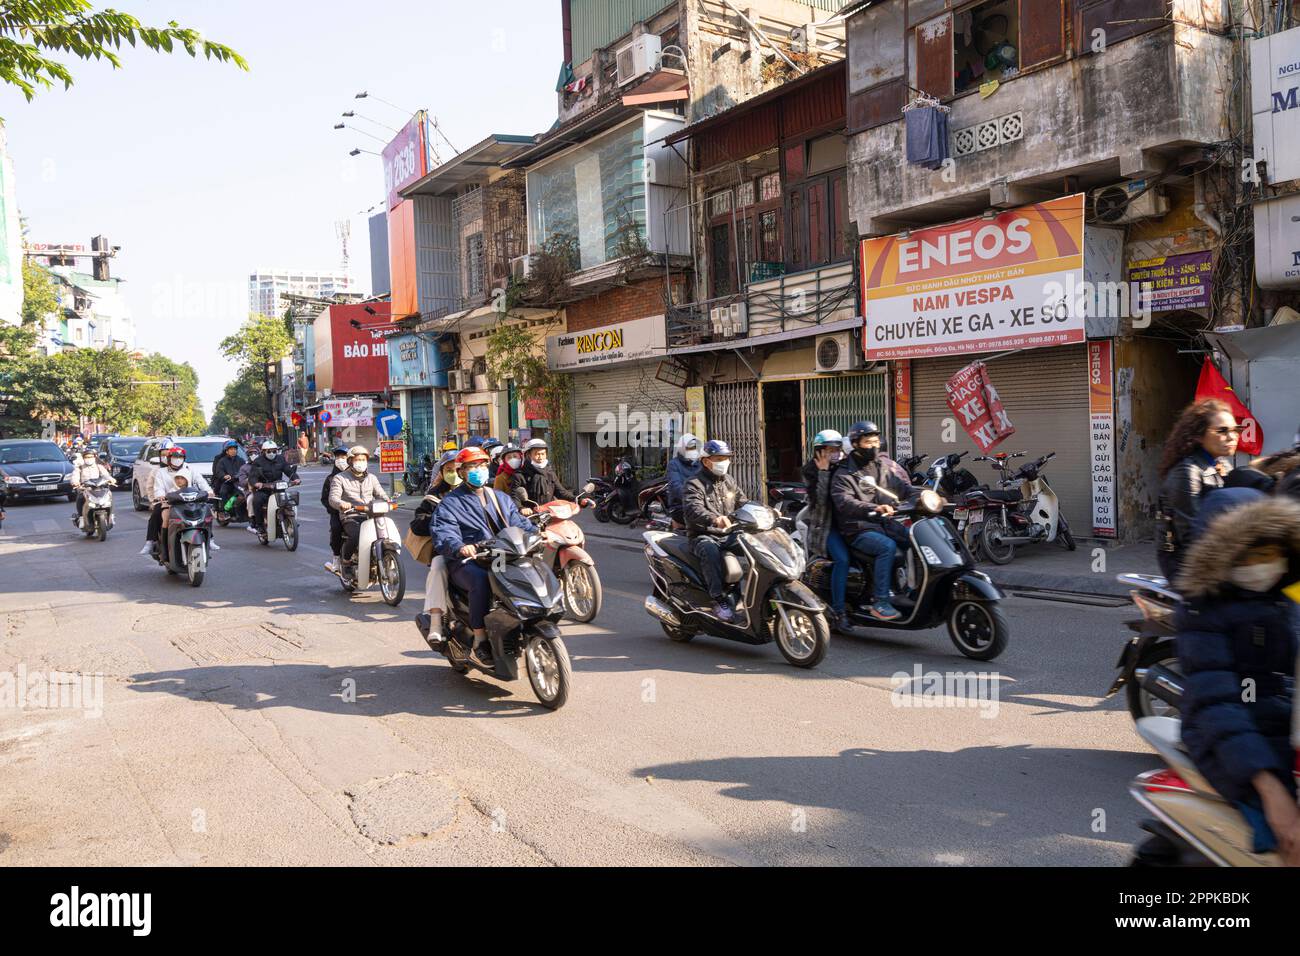 the chaotic traffic of mopeds in Hanoi, Vietnam. Stock Photo